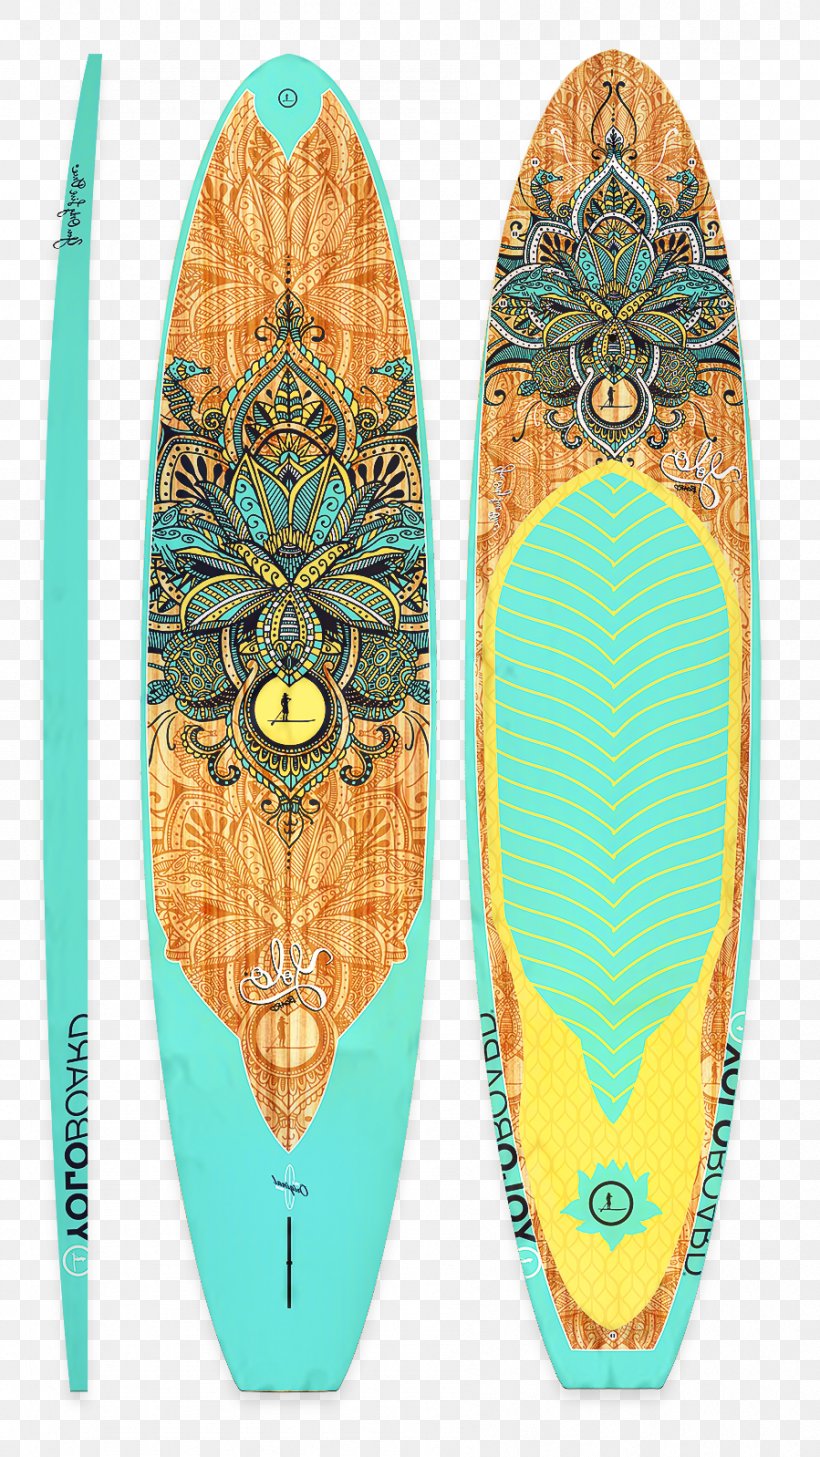 Surfboard Surfing Equipment, PNG, 899x1598px, Surfboard, Longboard, Skateboard, Skateboard Deck, Skateboarding Equipment Download Free